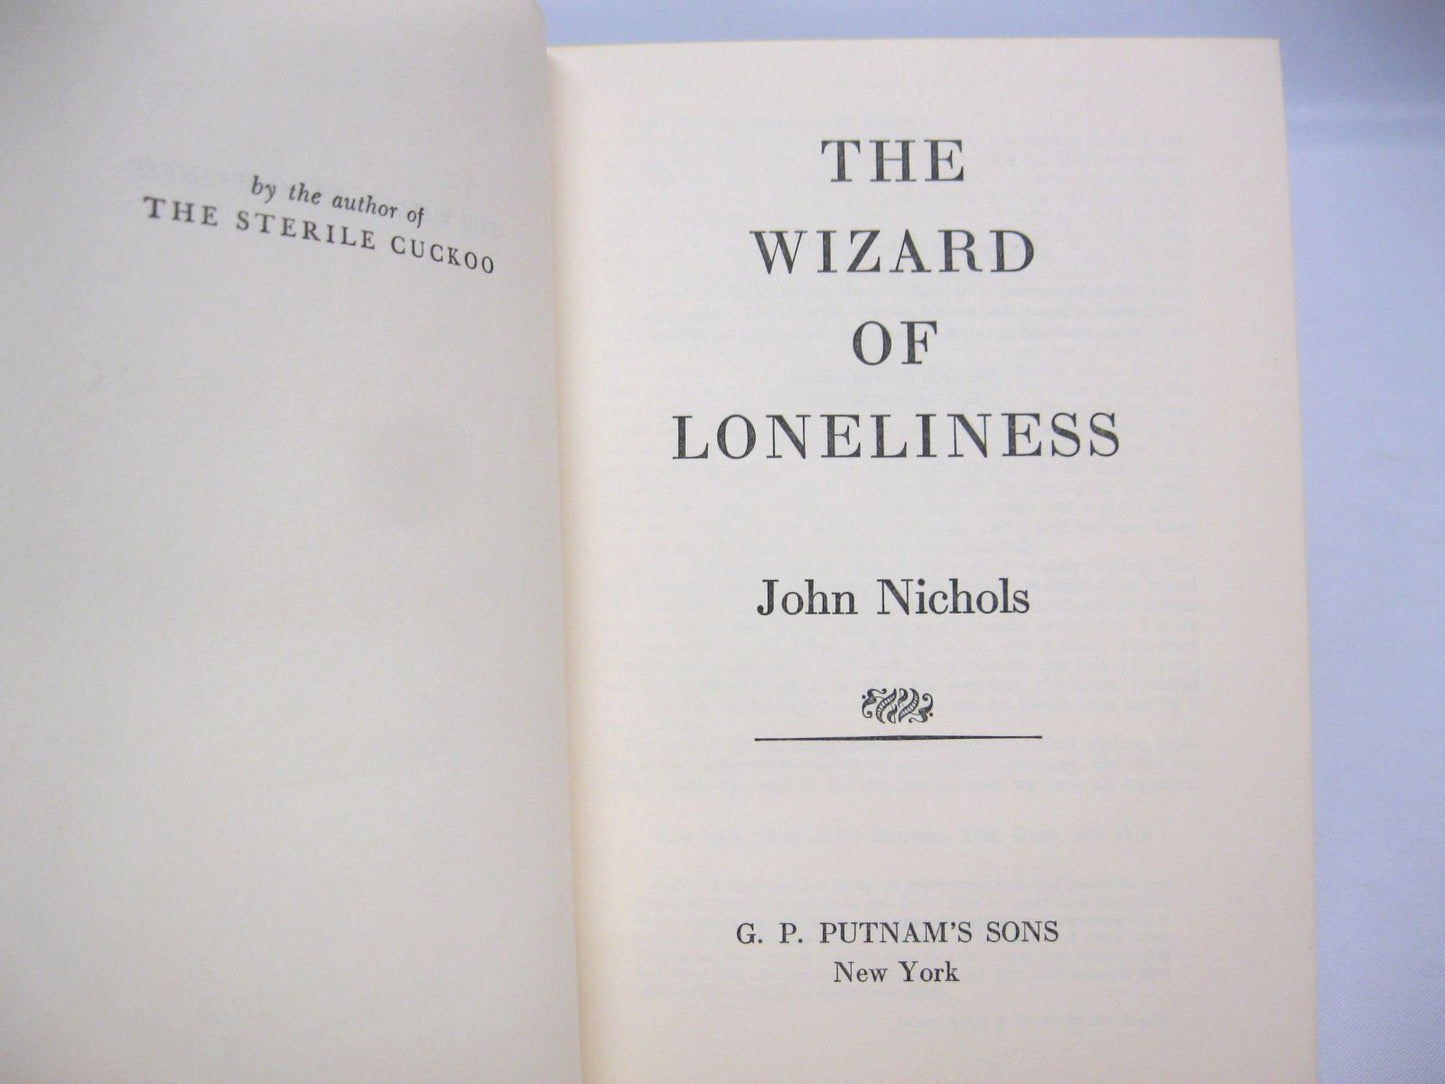 The Wizard of Loneliness by John Nichols